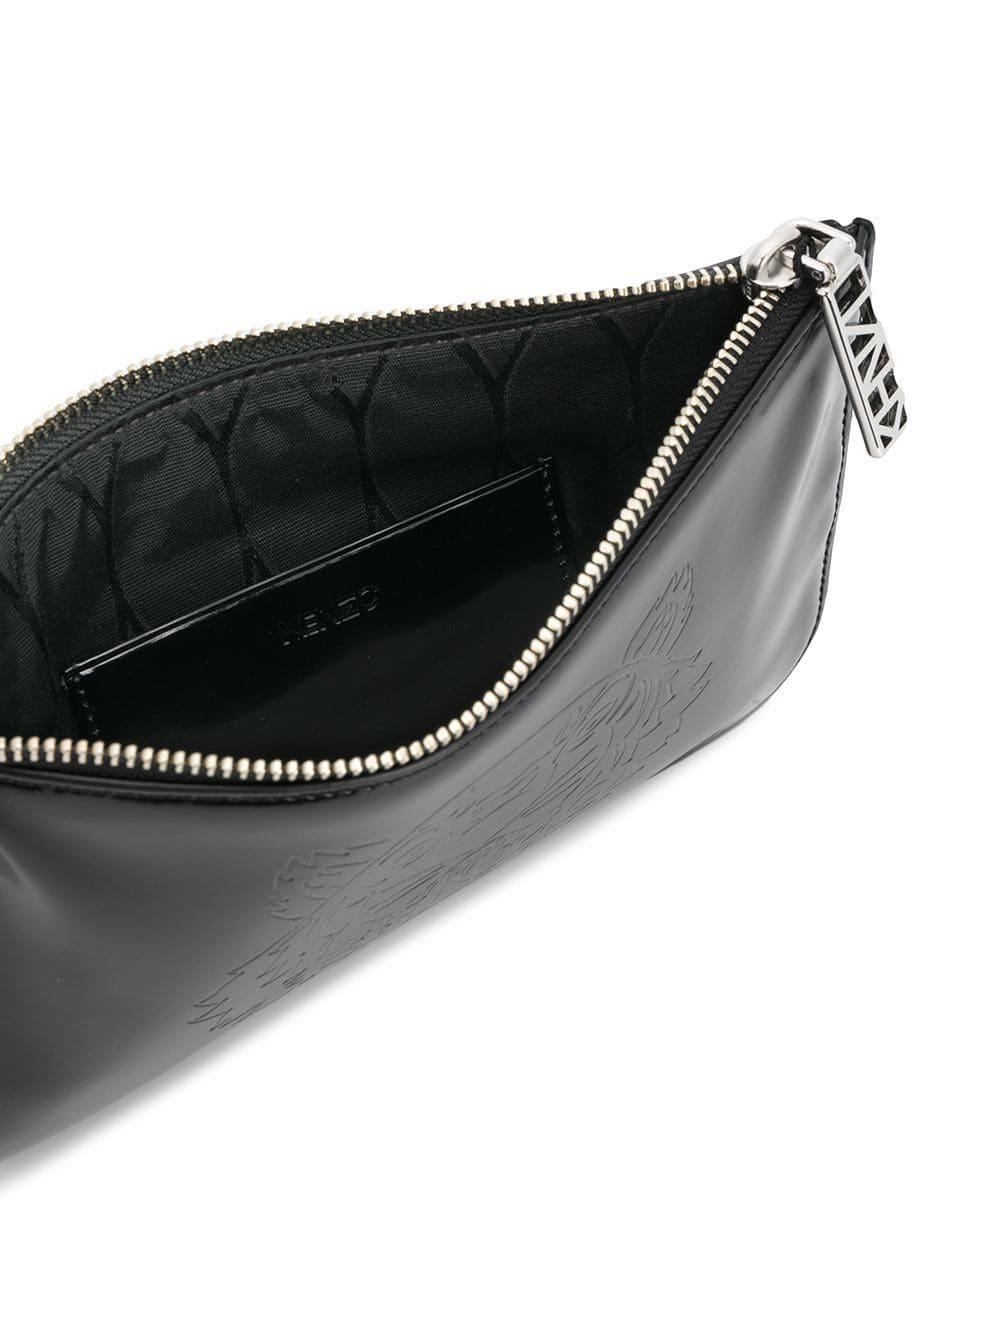 KENZO Zipped Coin Pouch in Black - Lyst